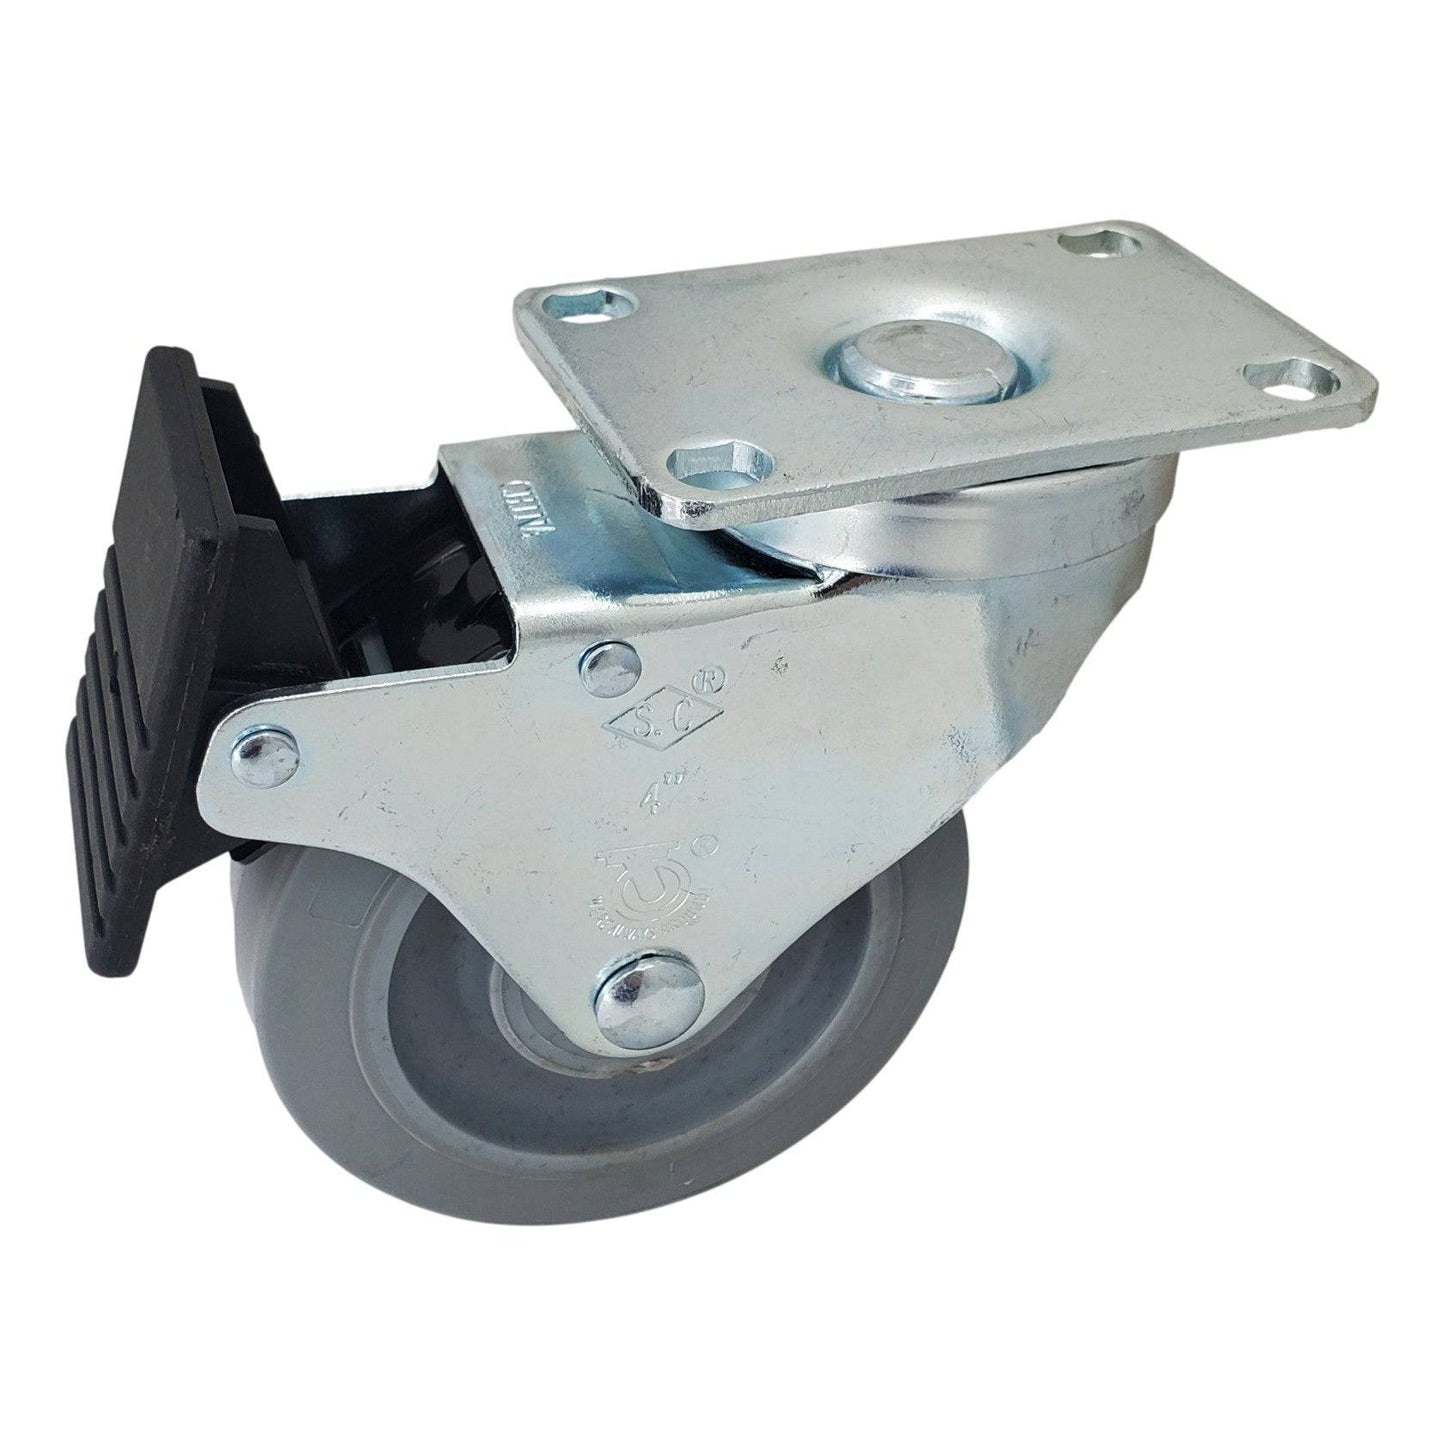 4" x 1-1/4" Nomadic Wheel Swivel Caster w/ Total Lock Brake - 300 lbs. Capacity - Durable Superior Casters